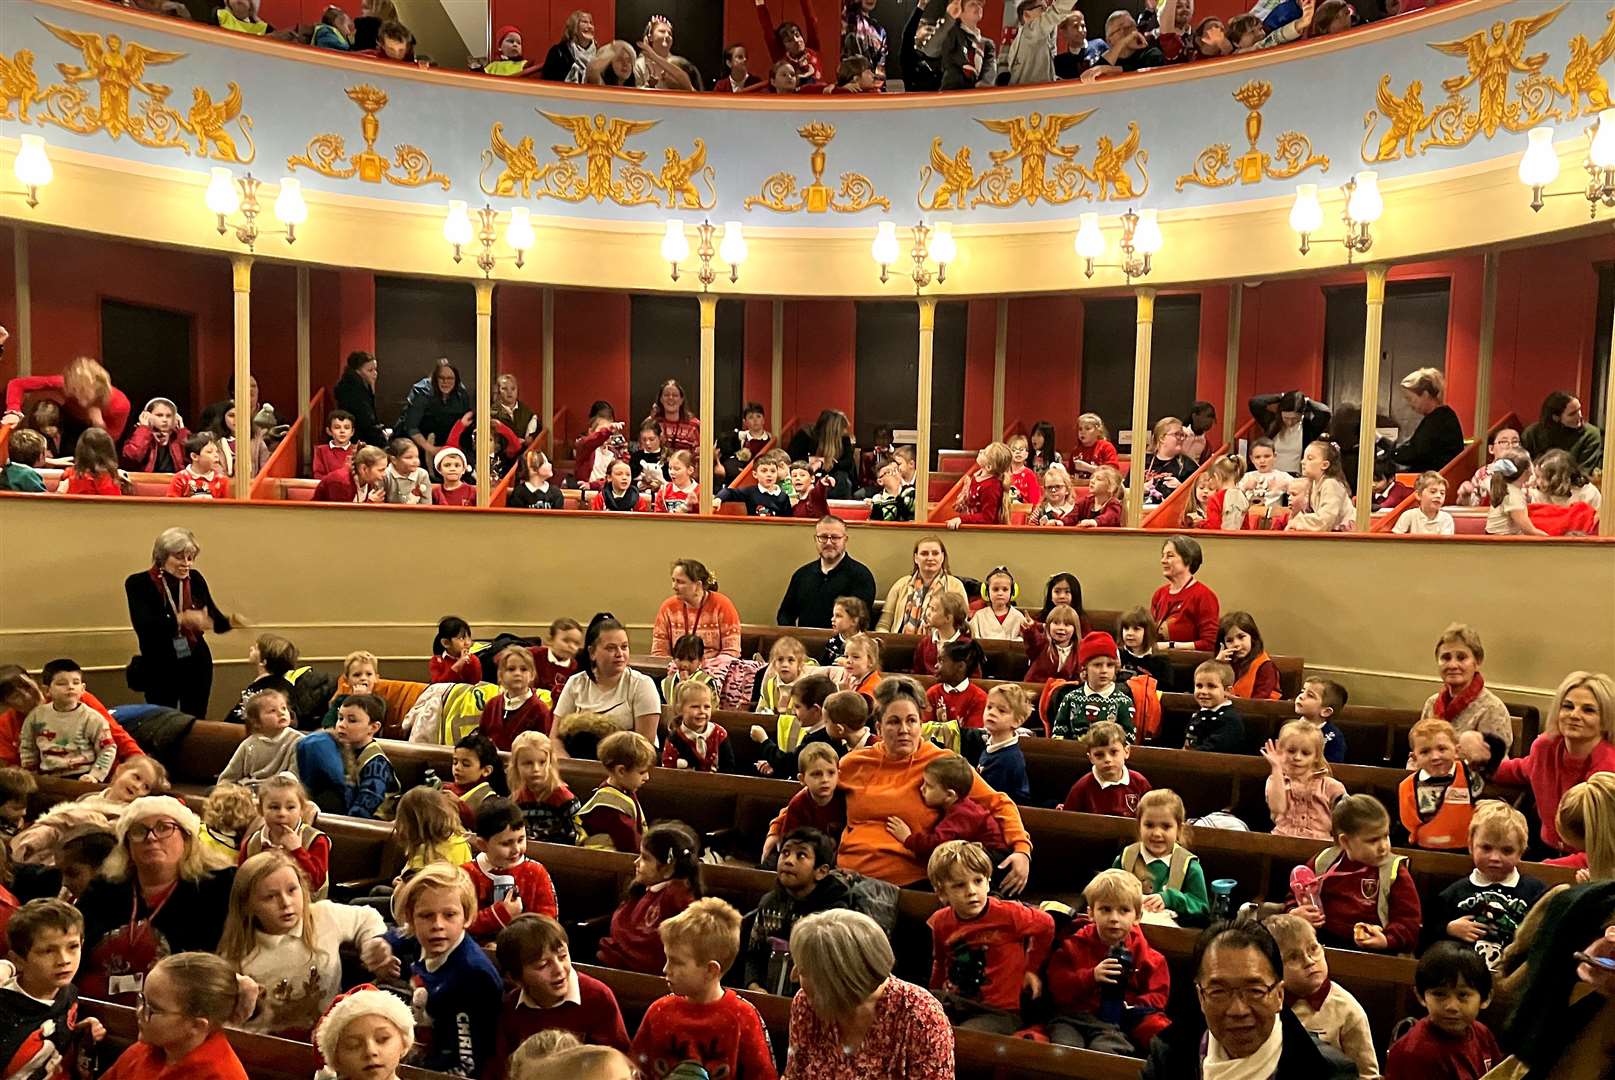 A whole school trip to the panto was described as 'amazing'. All pictures: Andy Abbott